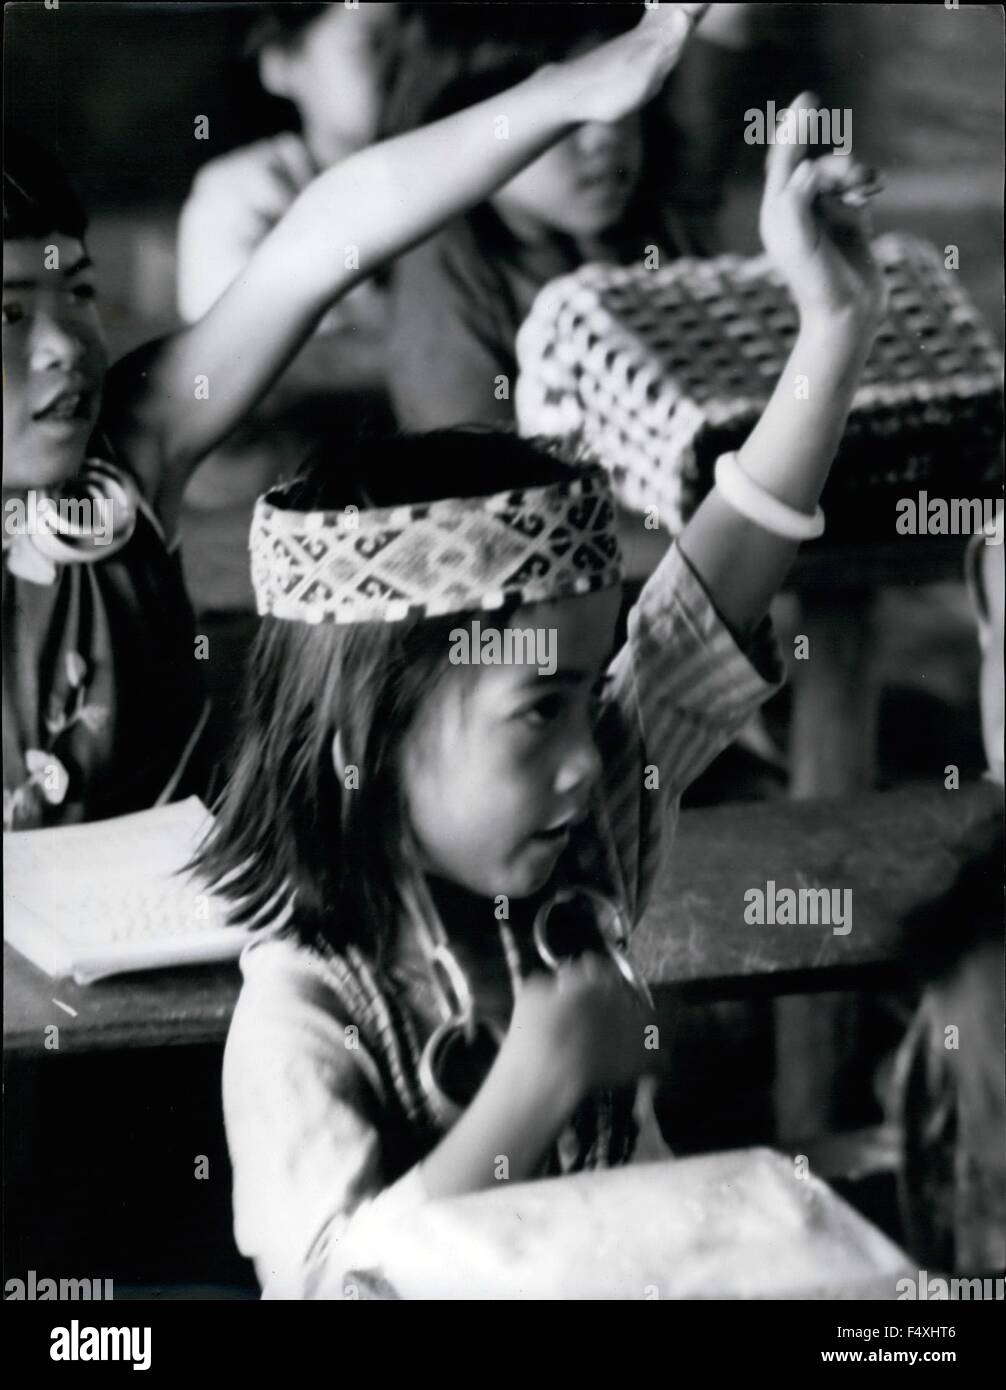 1962 - Drooping; Bejewelled Earlobes-And An Ex-Pupil At Ohio State Univ.: That's Sarawak's Jungle School A small girl sits demurely at her desk, her exercise book before her, hands in her lap, eyes fixed on her teacher-just like any other good pupil. but she has a beaded crown on her head, and her little ears are weighed down, drooping, decorated by a cluster of glittering heavy rings. And the classroom walls are bamboo, the windows air. She is learning English in the jungle schoolin barrio, the Kelabit Higher Primary School which serves 2,000square miles of Sarewaka and has 297 pupils. Most Stock Photo